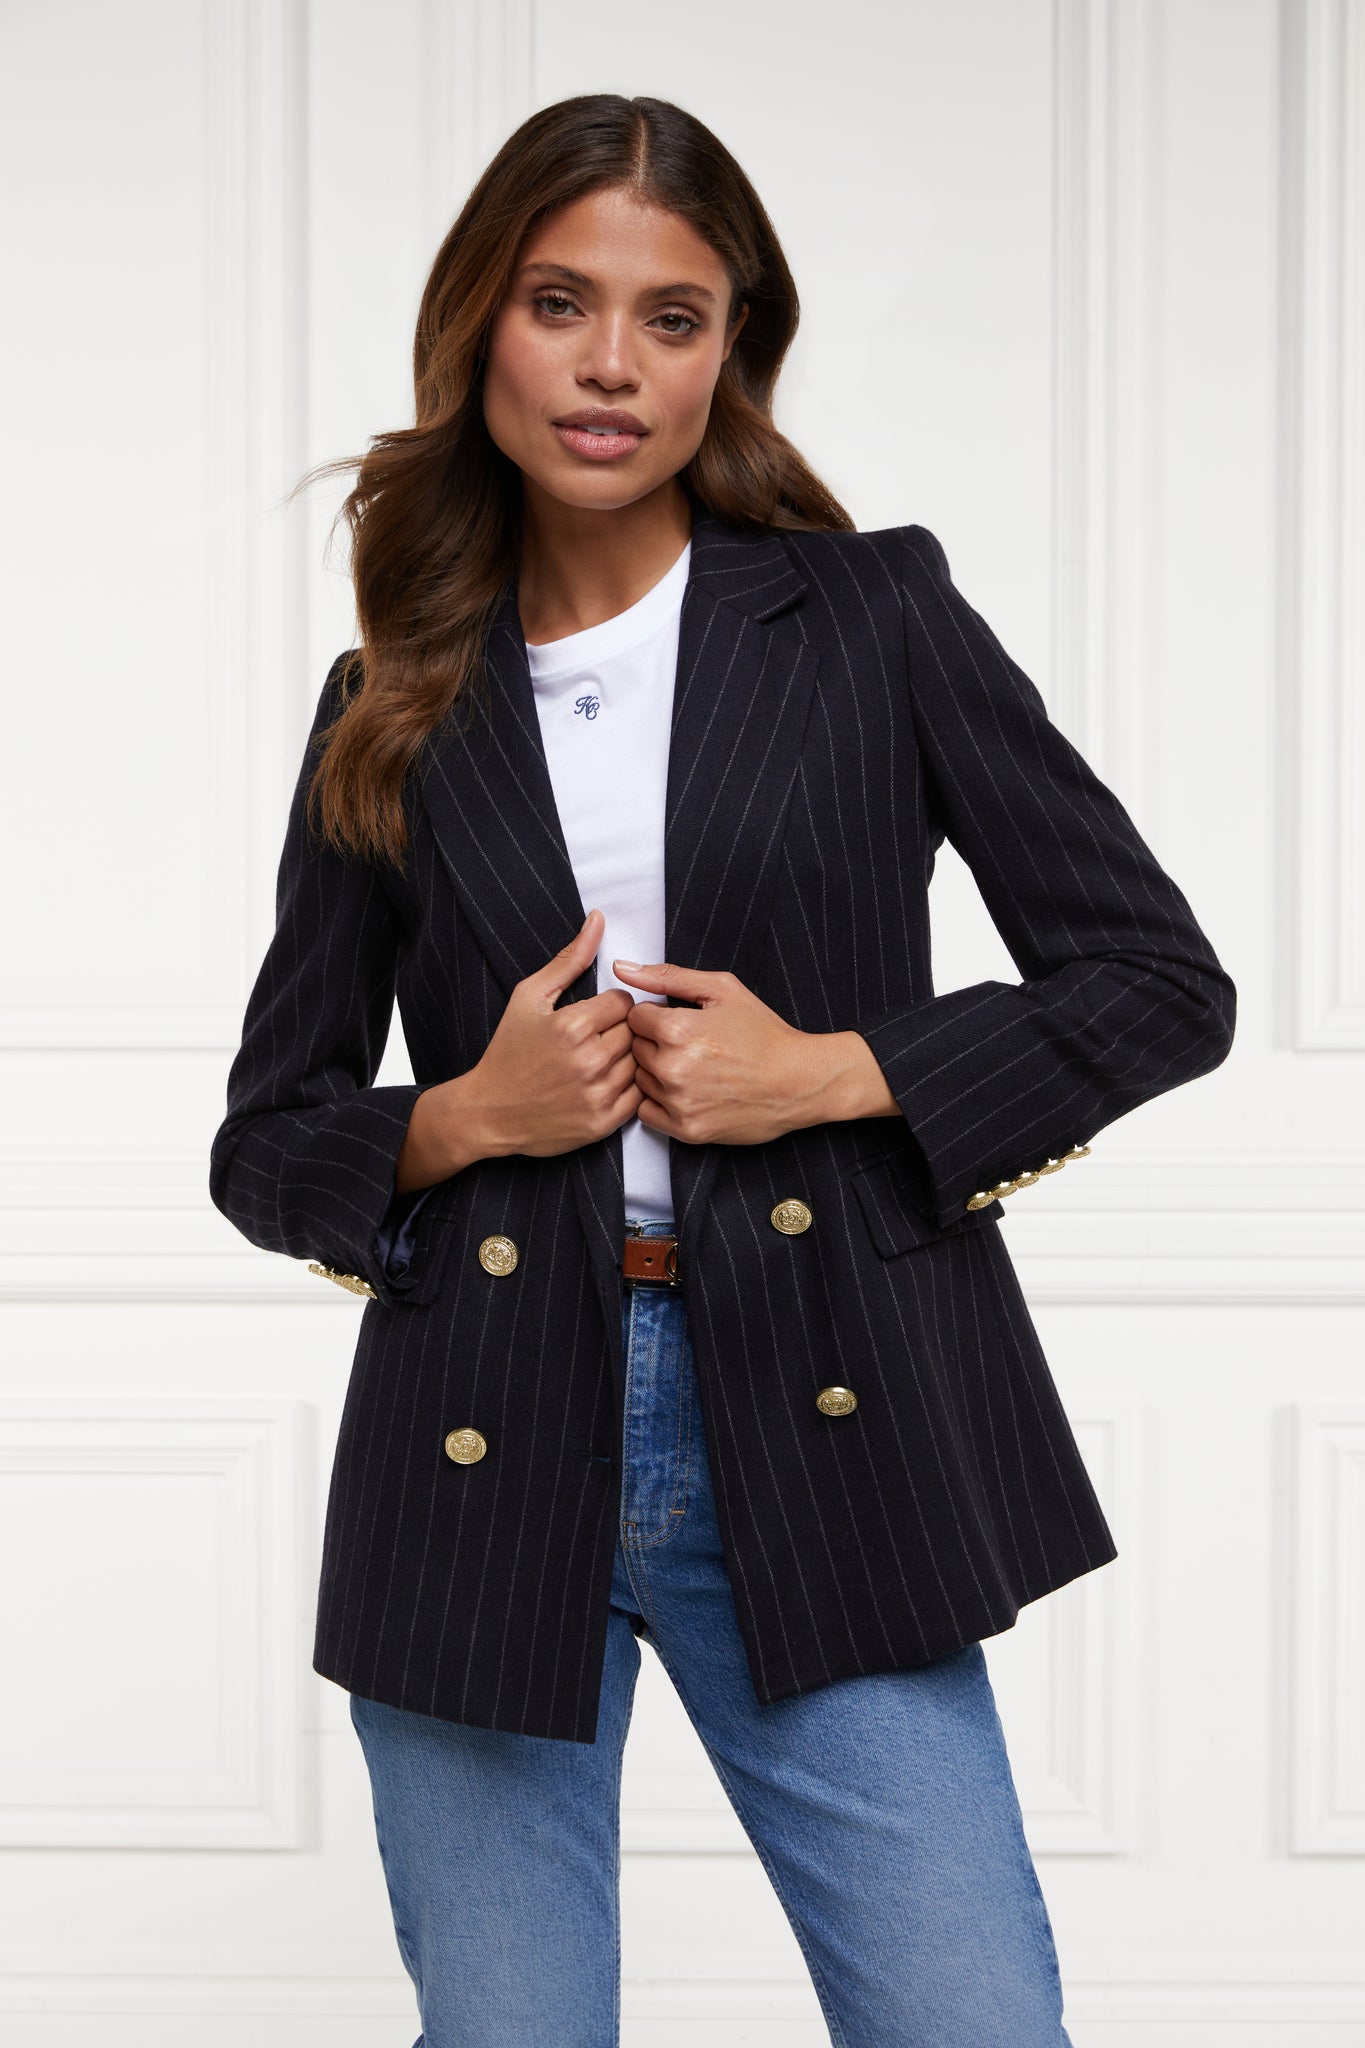 double breasted wool blazer in navy and cream chalk pinstripe with two hip pockets and gold button detials down front and on cuffs and handmade in the uk worn with white tee and light wash denim jeans